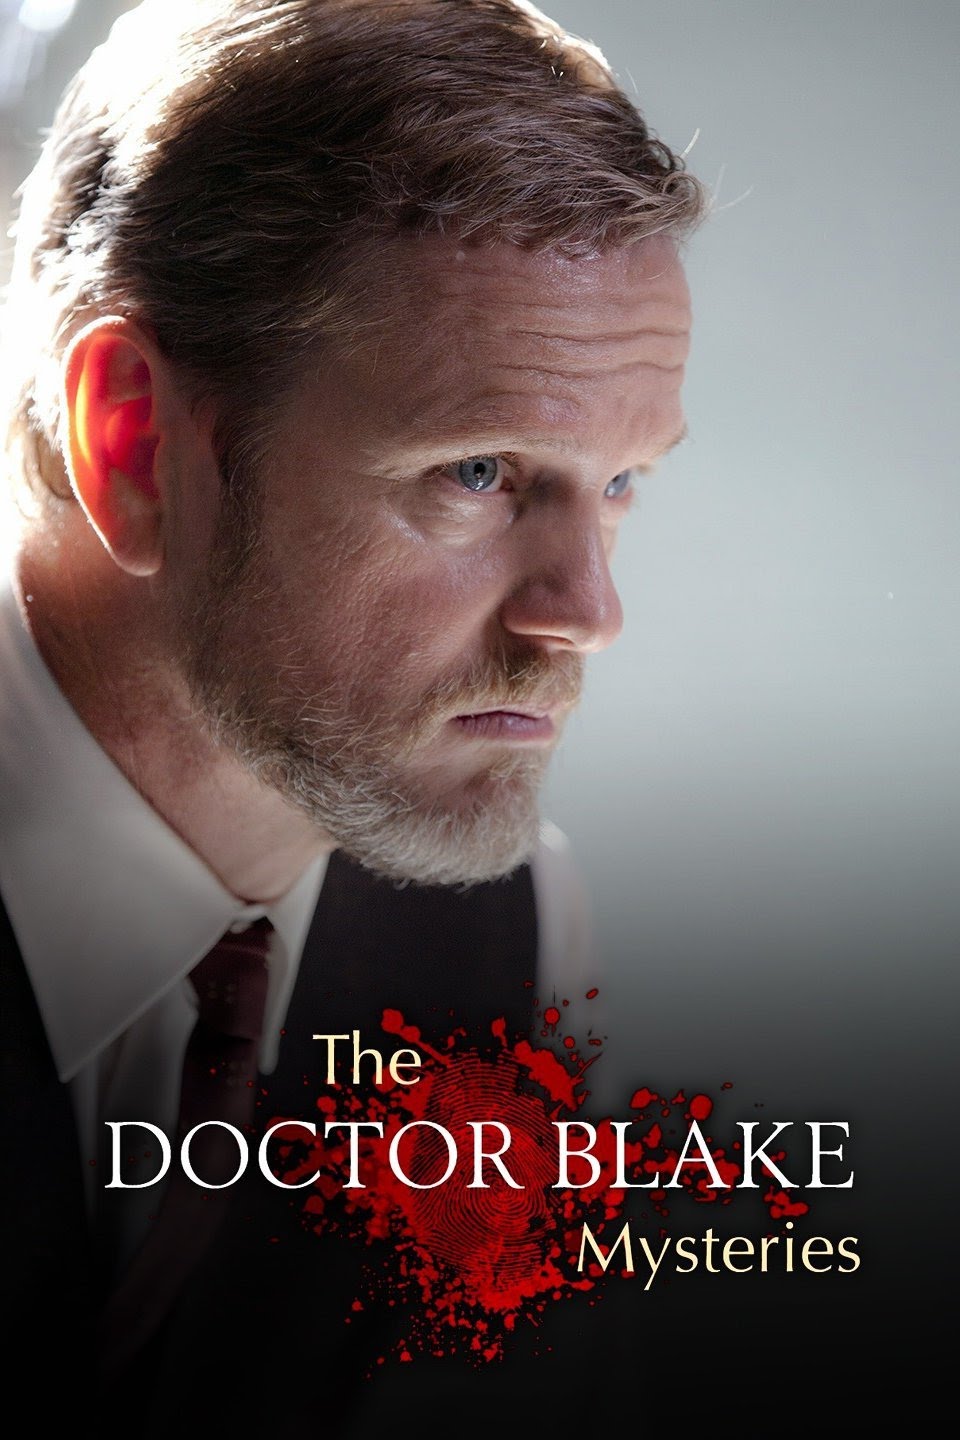 The Doctor Blake Mysteries S2 E6